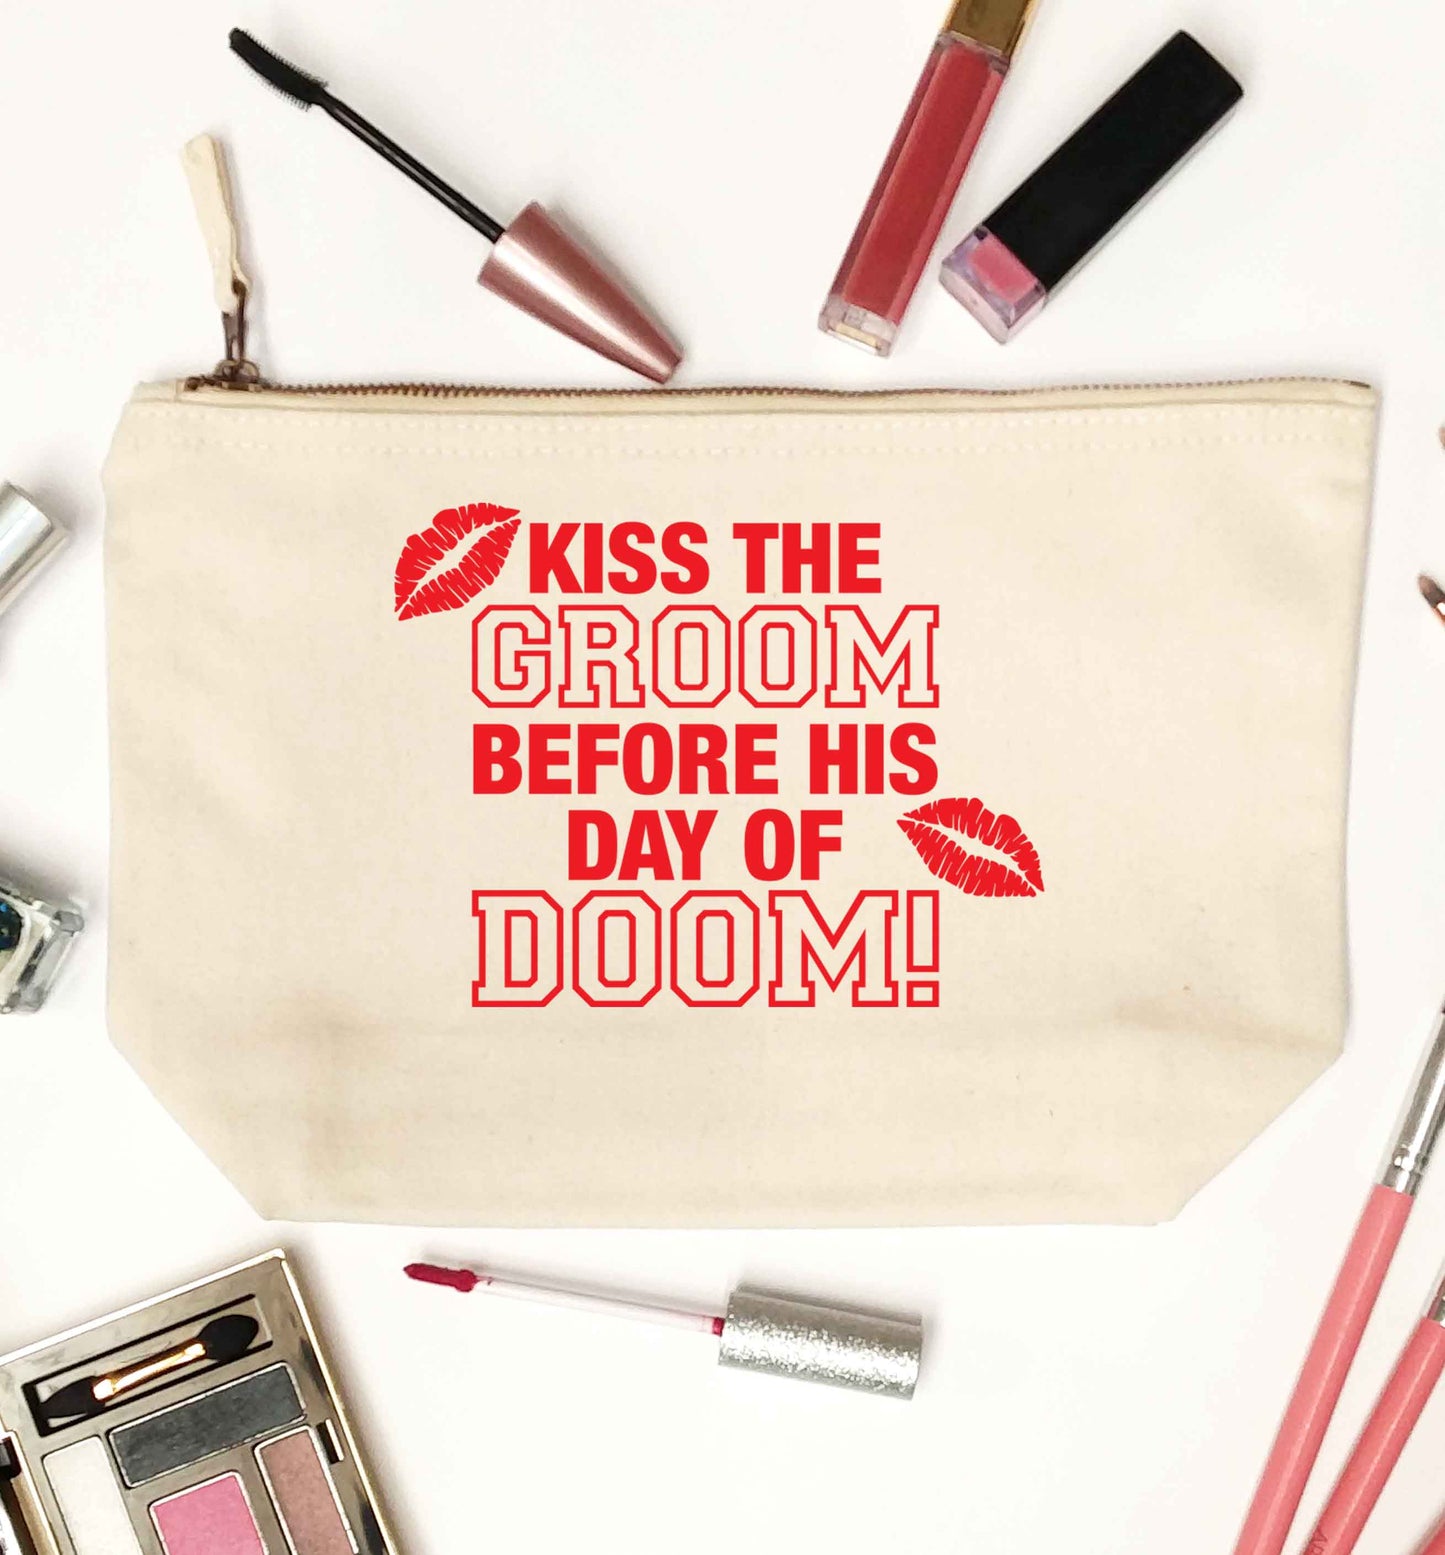 Kiss the groom before his day of doom! natural makeup bag